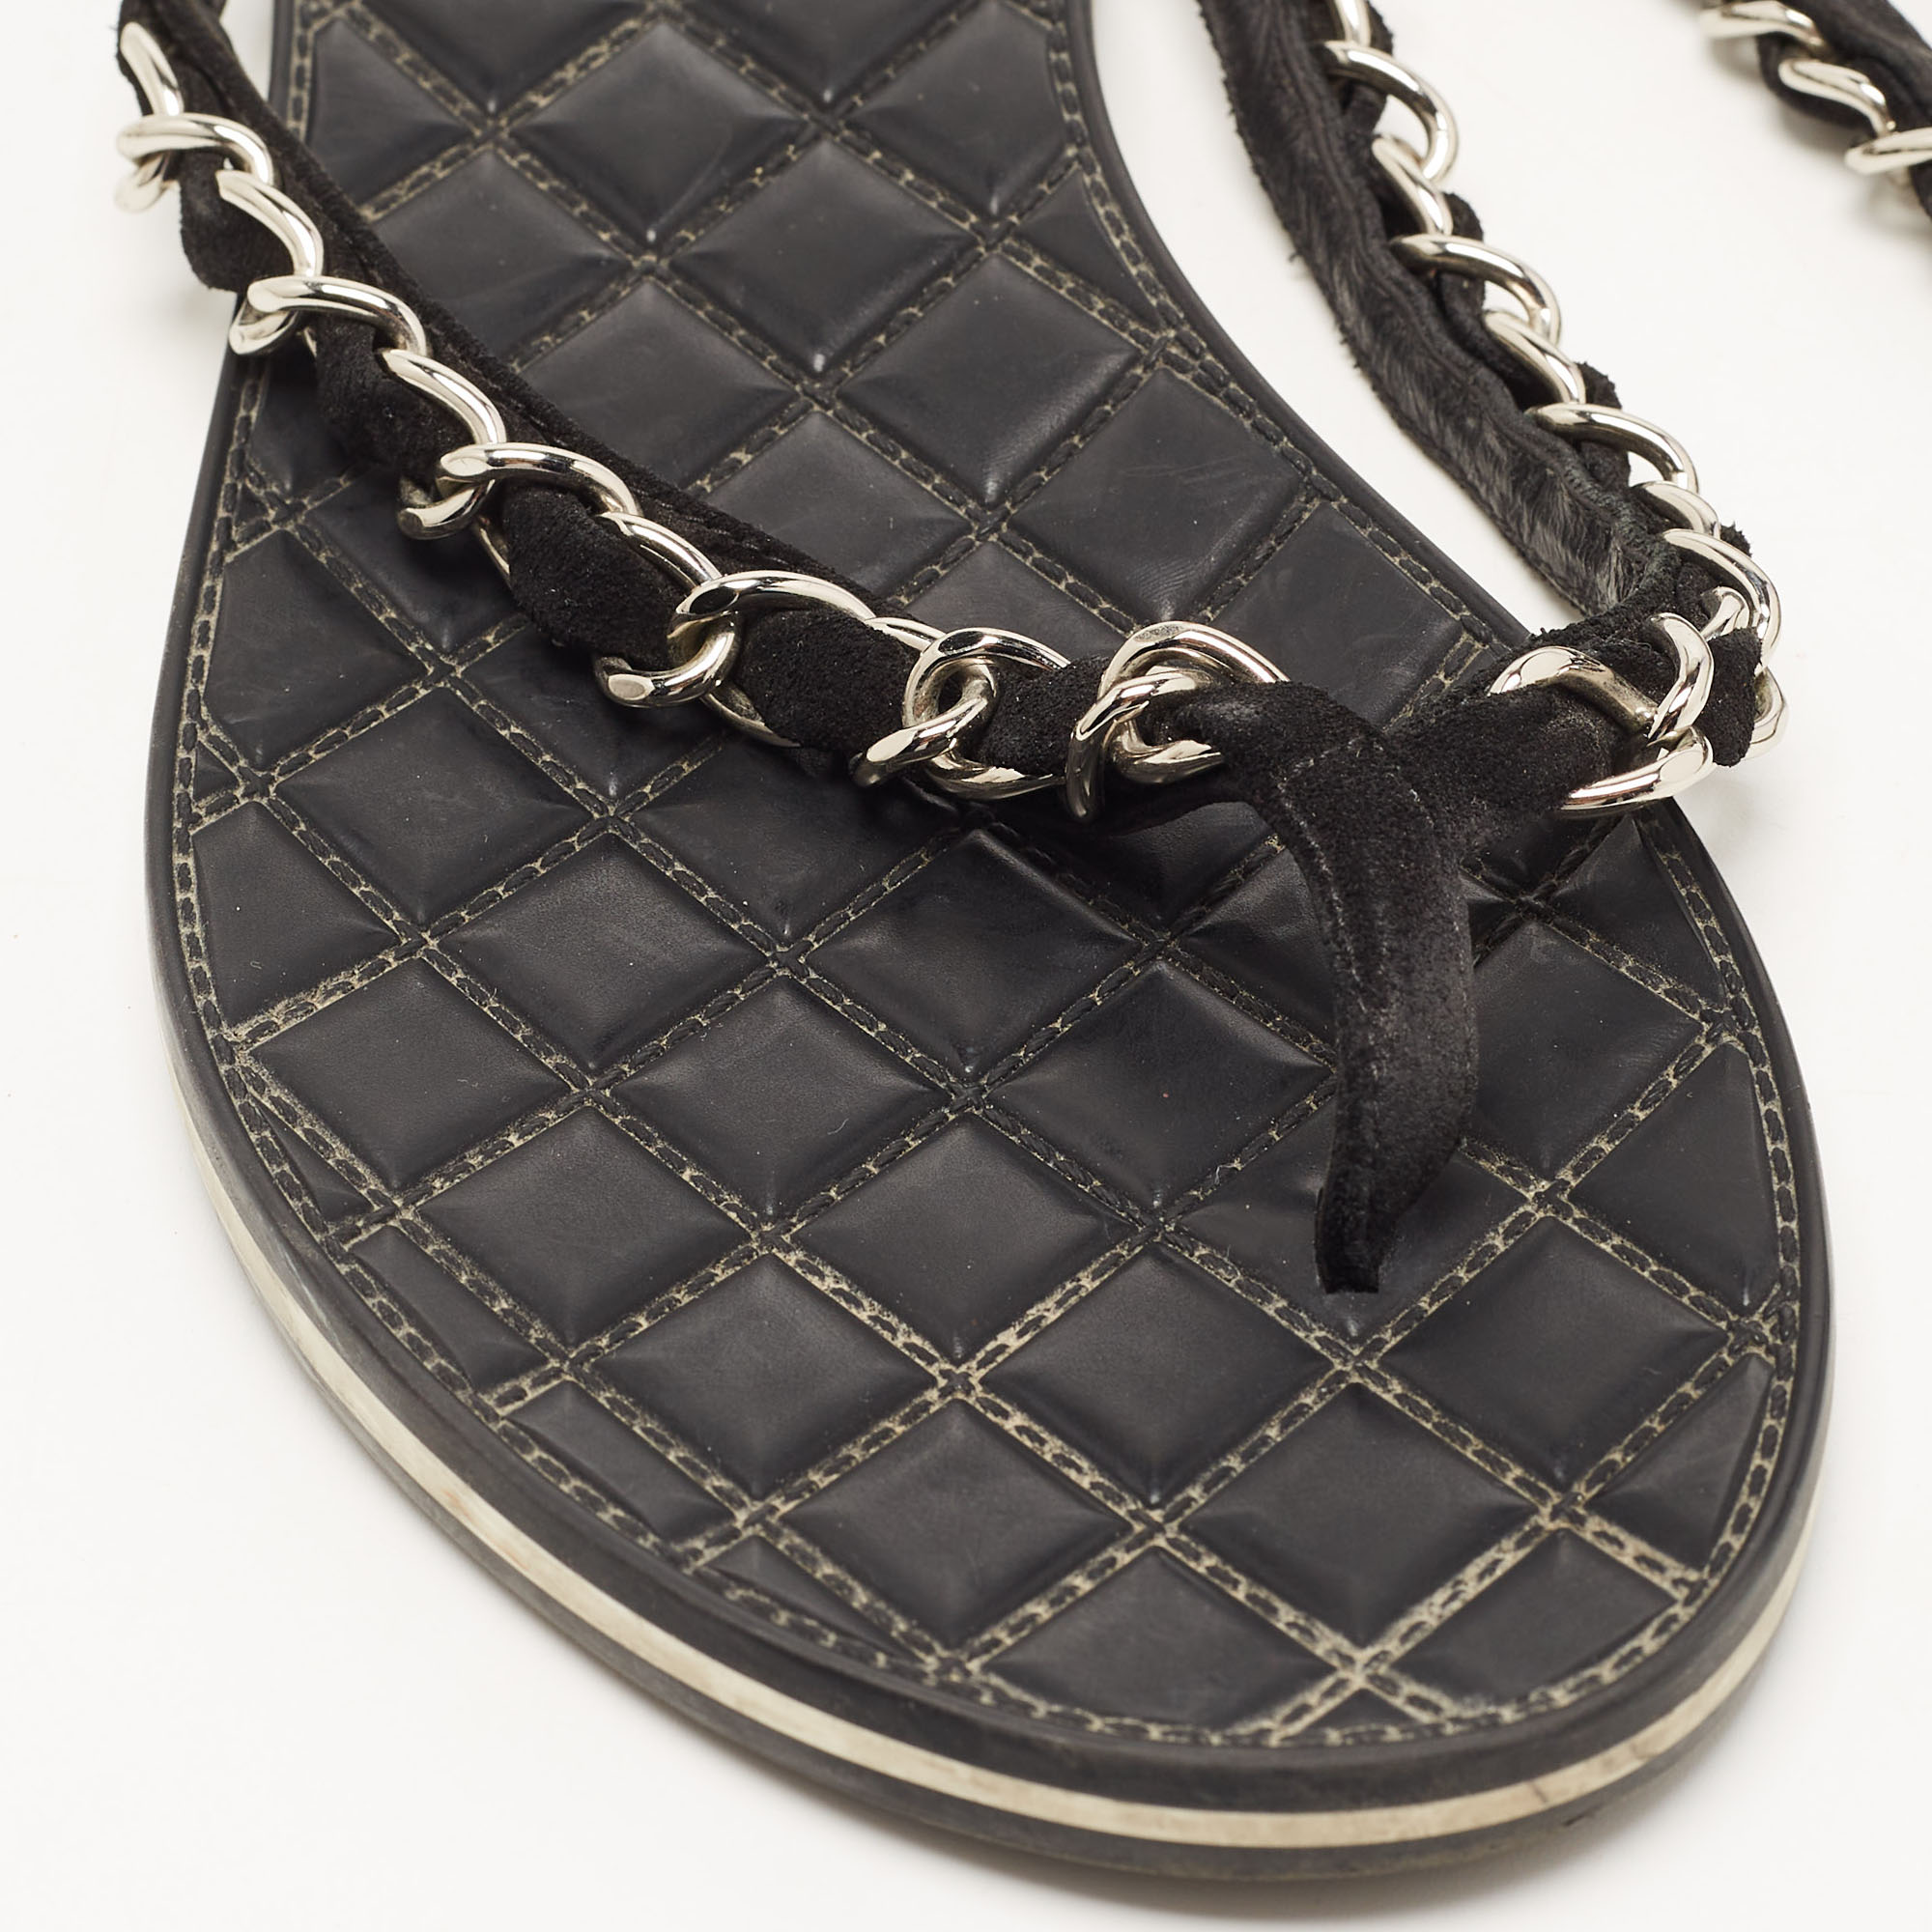 Chanel Black Suede Chain Detail Thong Flat Slides Size 37.5